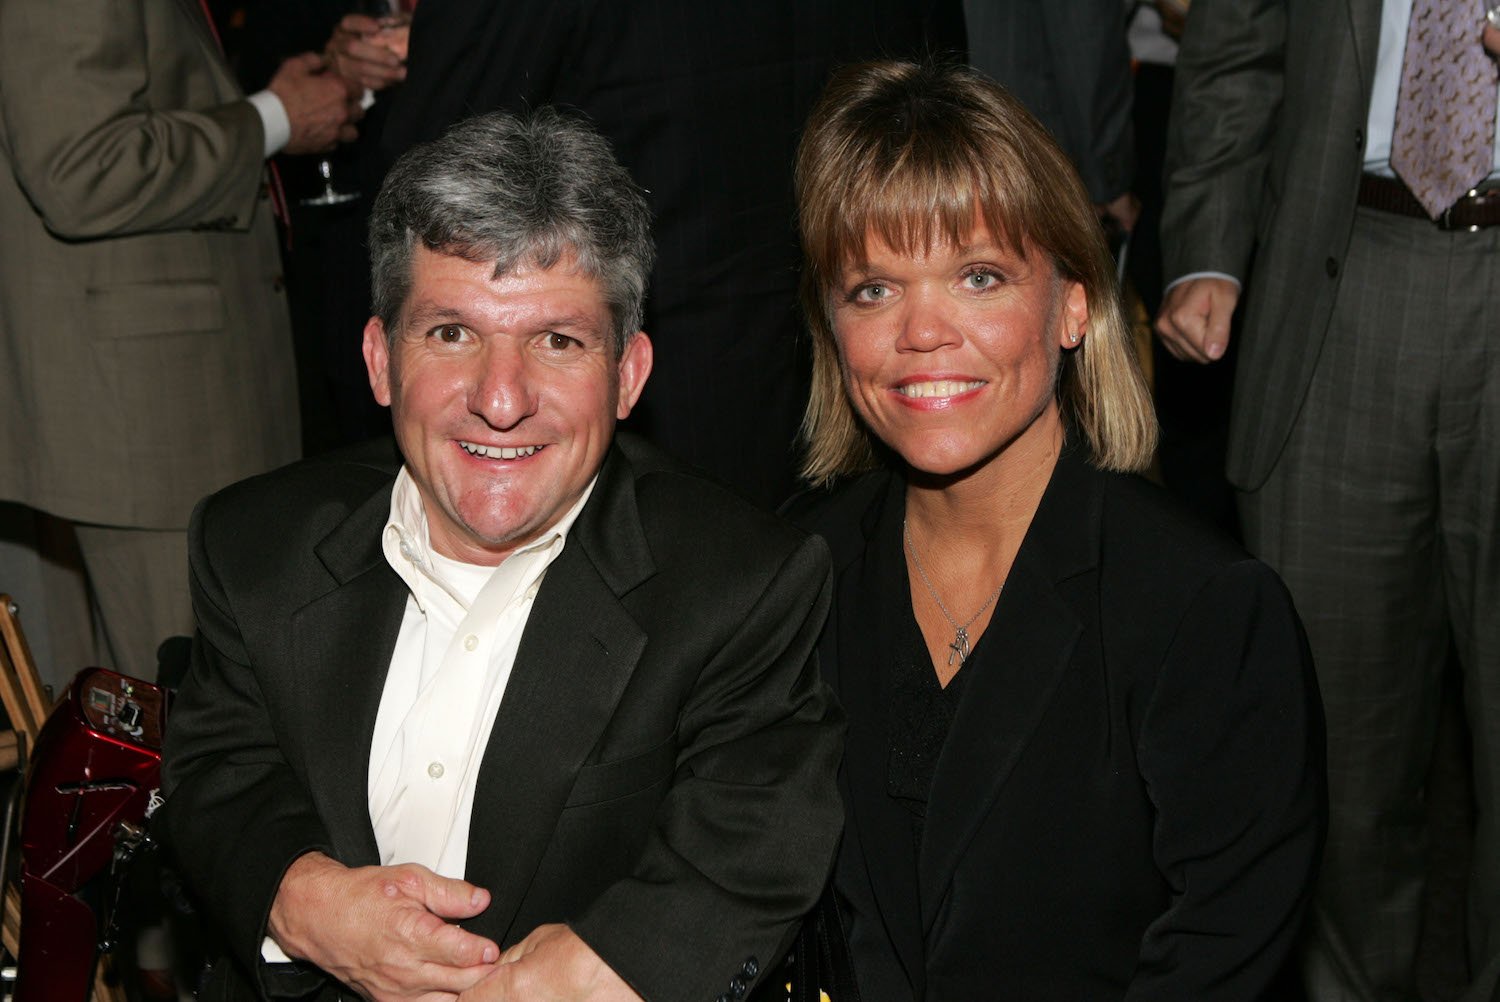 'Little People, Big World' stars Matt and Amy Roloff smiling against a black background